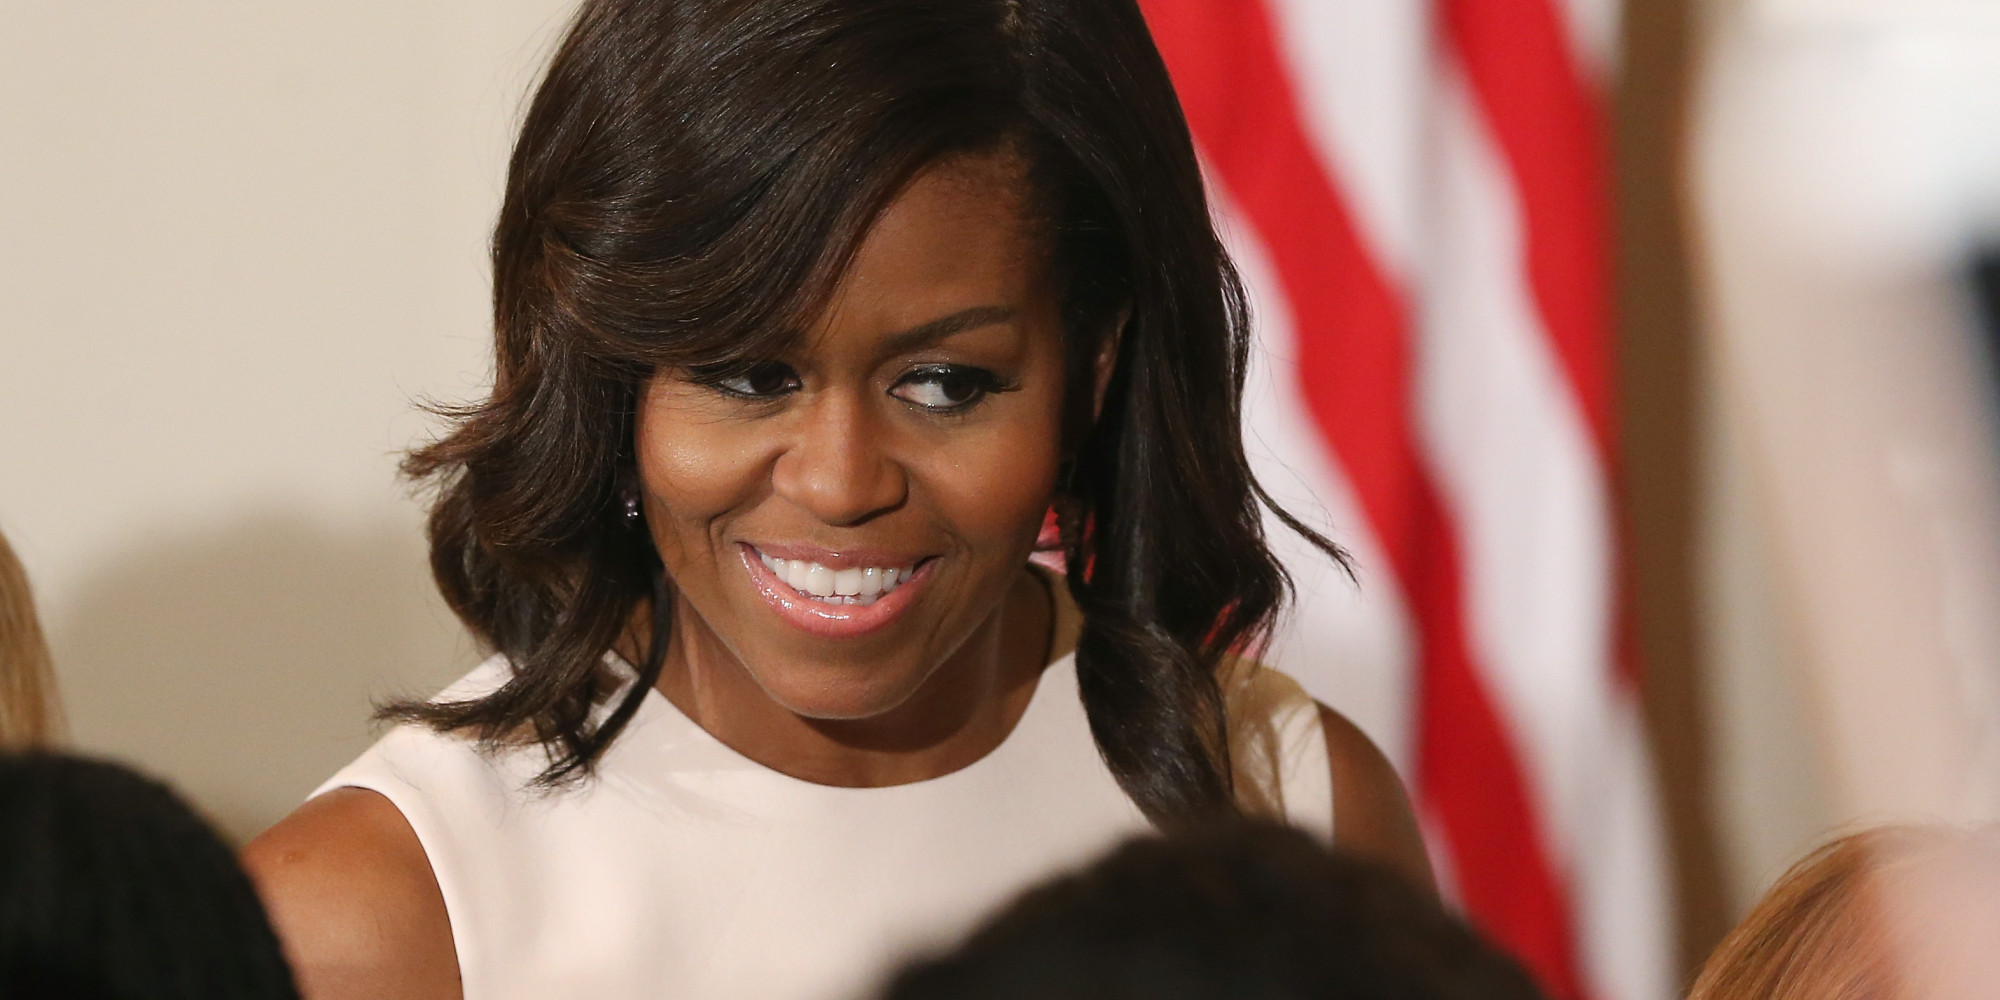 Michelle Obamas Curly Hair And More Celebrity Beauty Looks We Loved